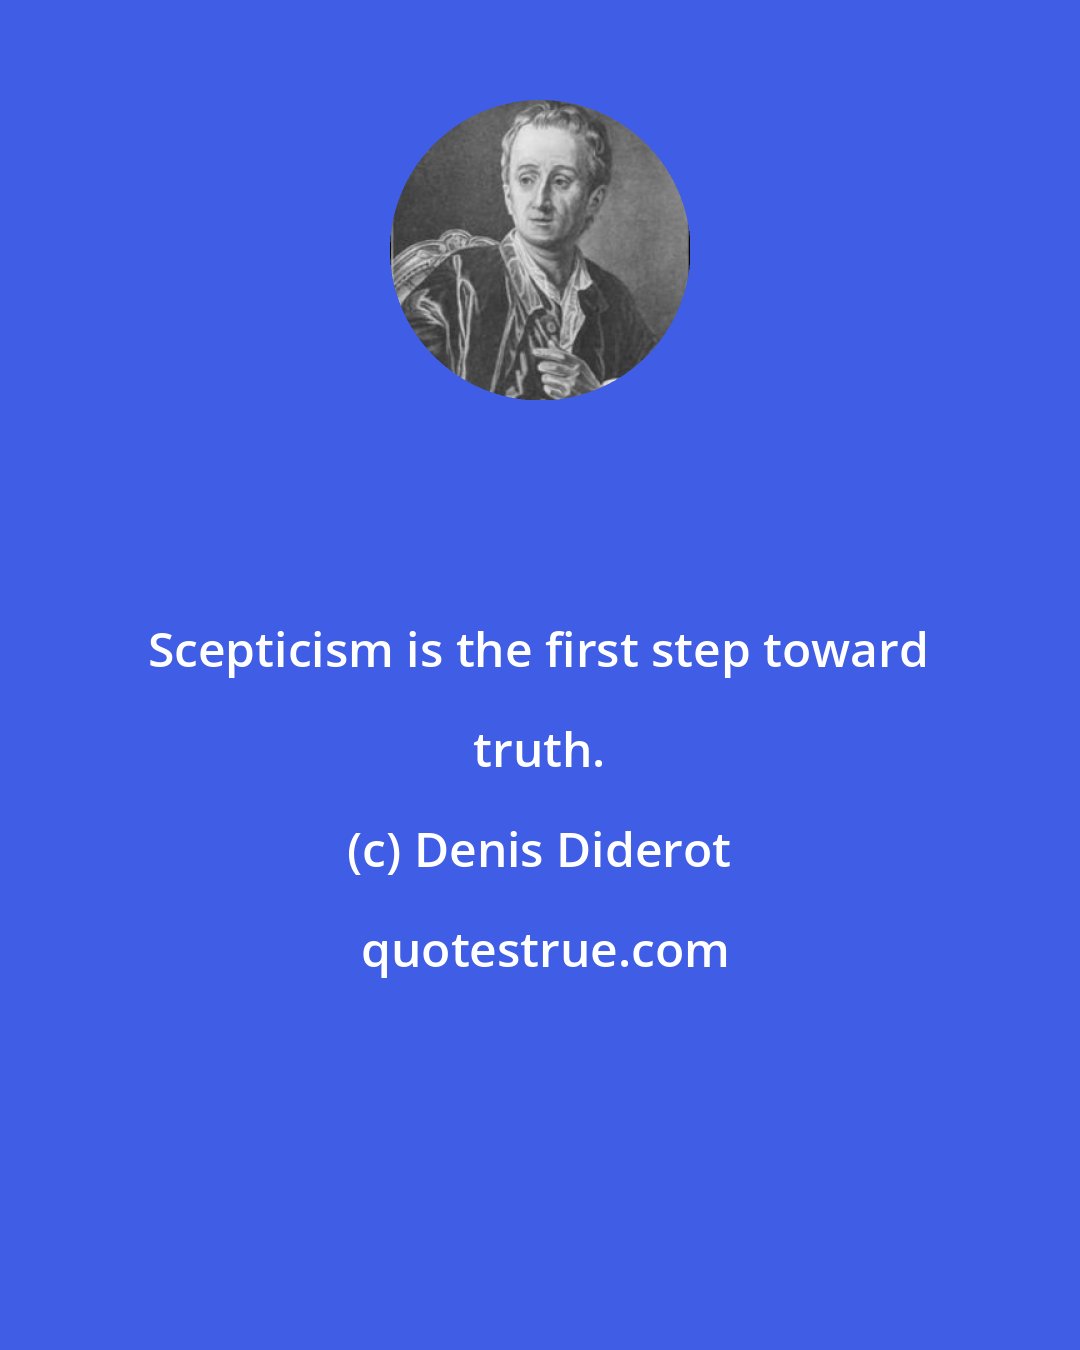 Denis Diderot: Scepticism is the first step toward truth.